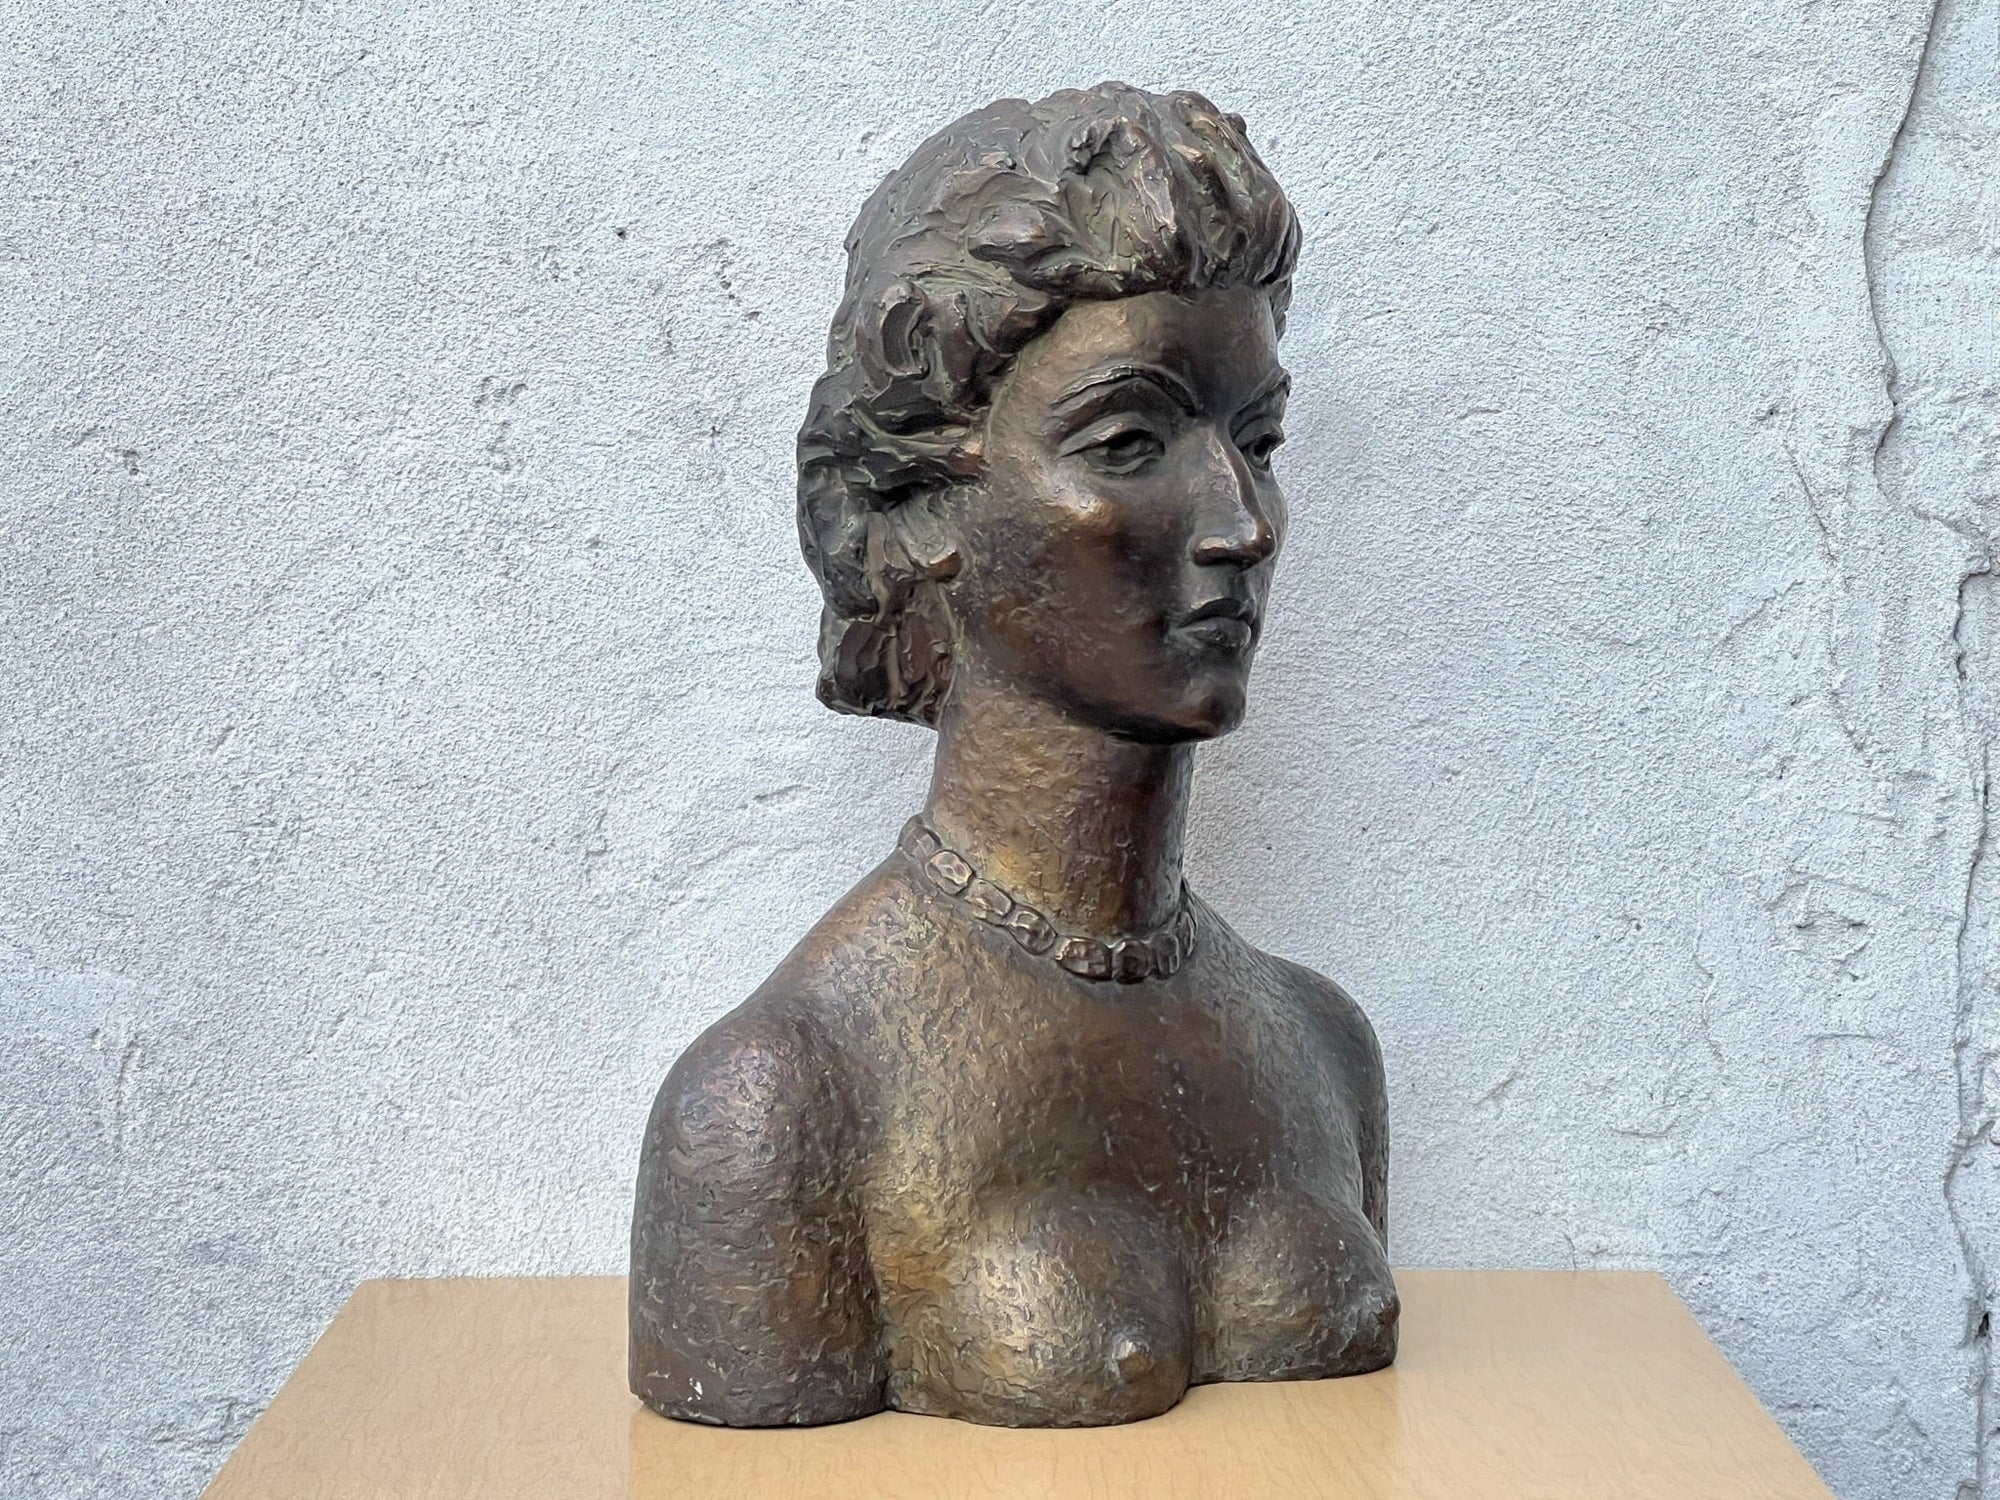 I Like Mike's Mid Century Modern Sculptures & Statues Large Regal Female Nude Bust, Ceramic Scupture with Bronze Finish, by Arlene Wingate C 1950